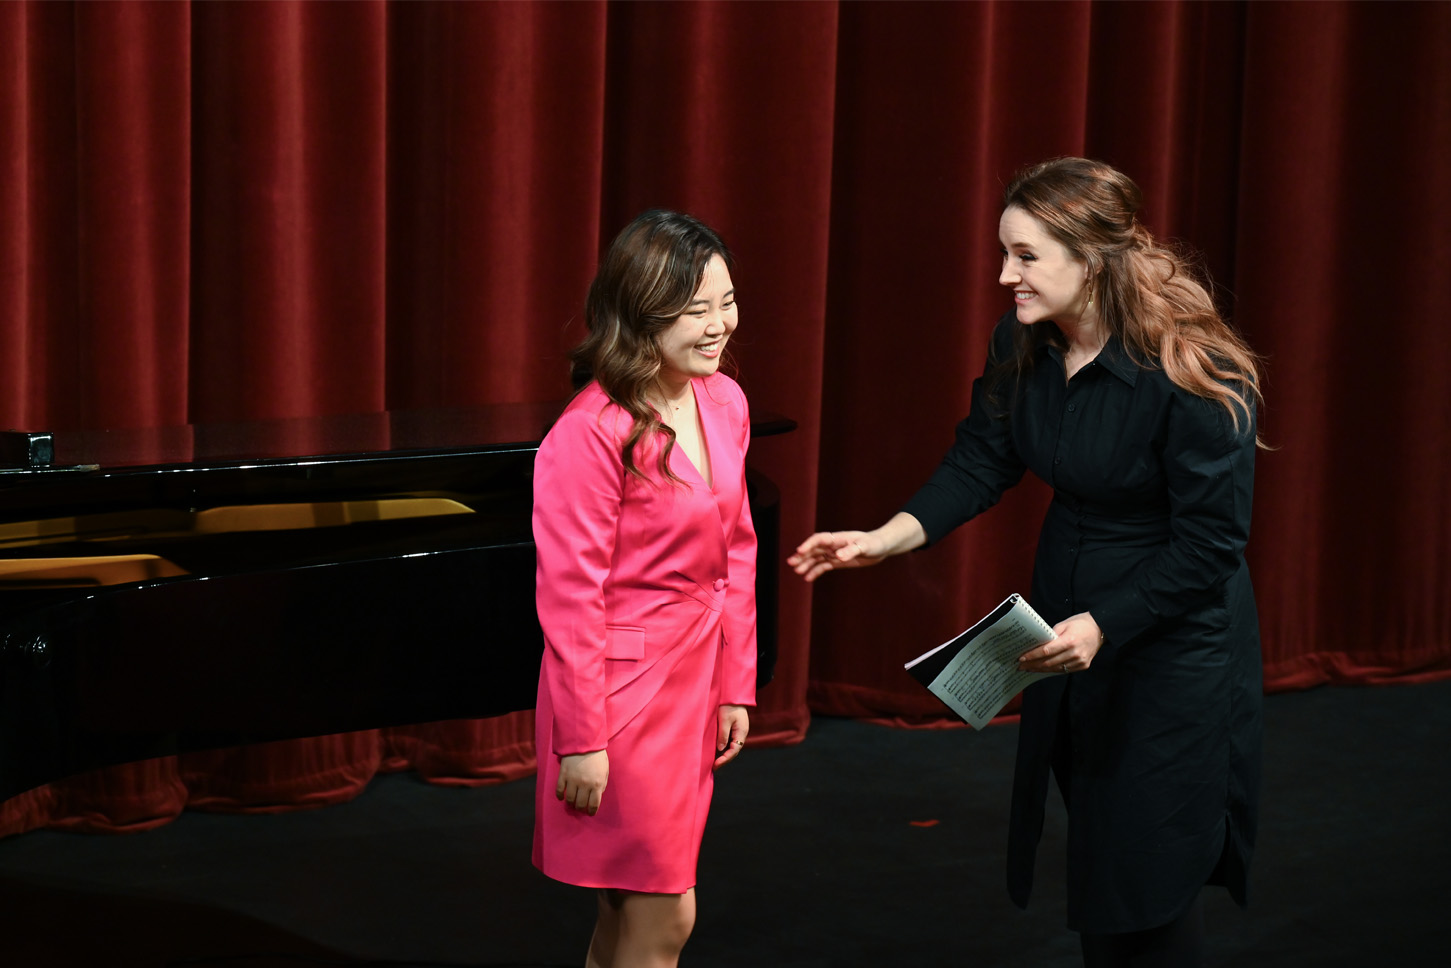 A female student, wearing a bright pink dress, standing in front of a piano, with a women with brown hair and wearing a black dress, smiling at the student, walking on stage.